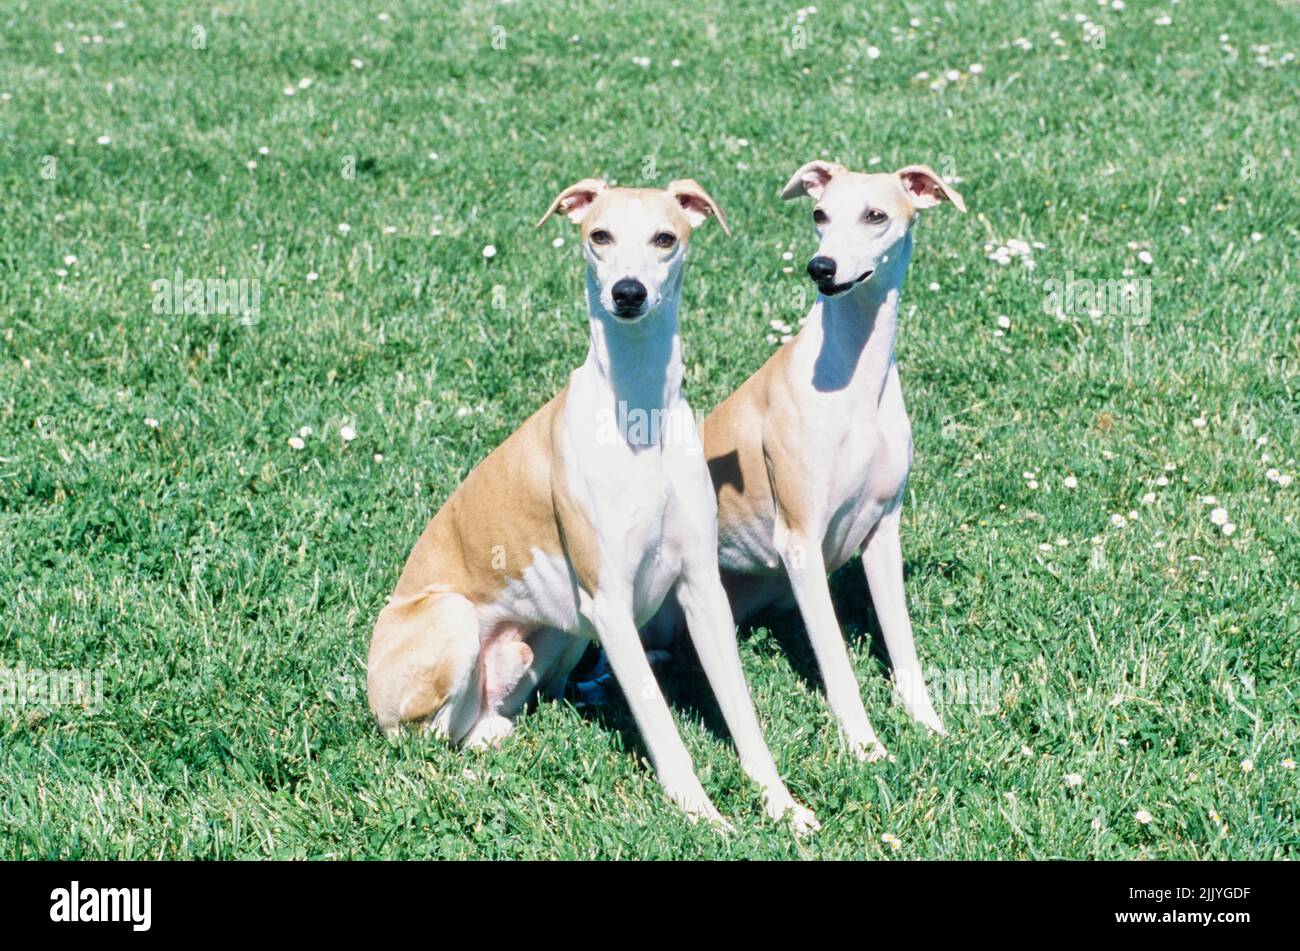 Two whippets sitting in grass outside Stock Photo